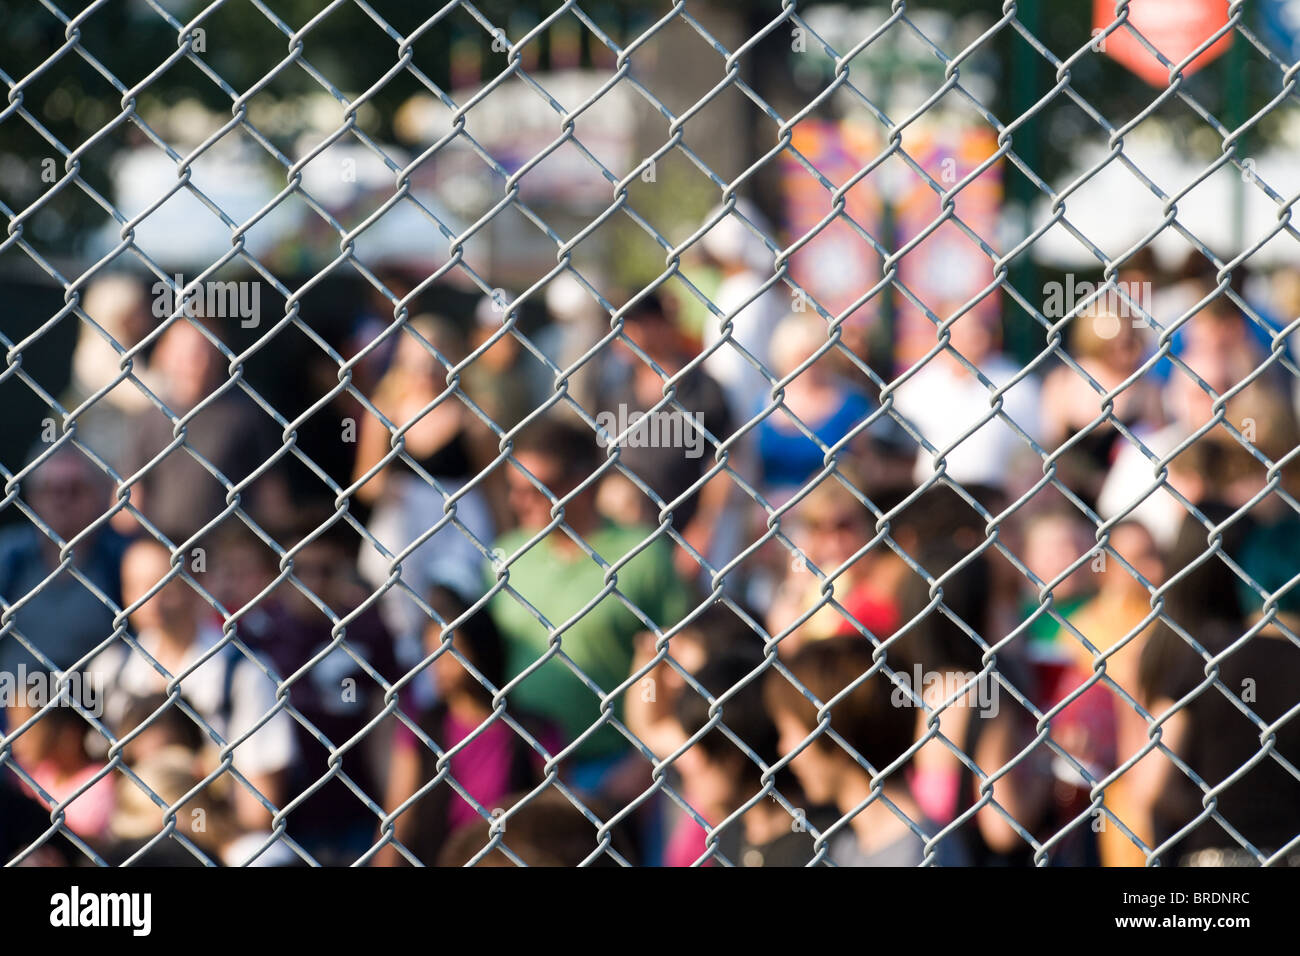 Metal netting and crowd, focus on metal netting Stock Photo